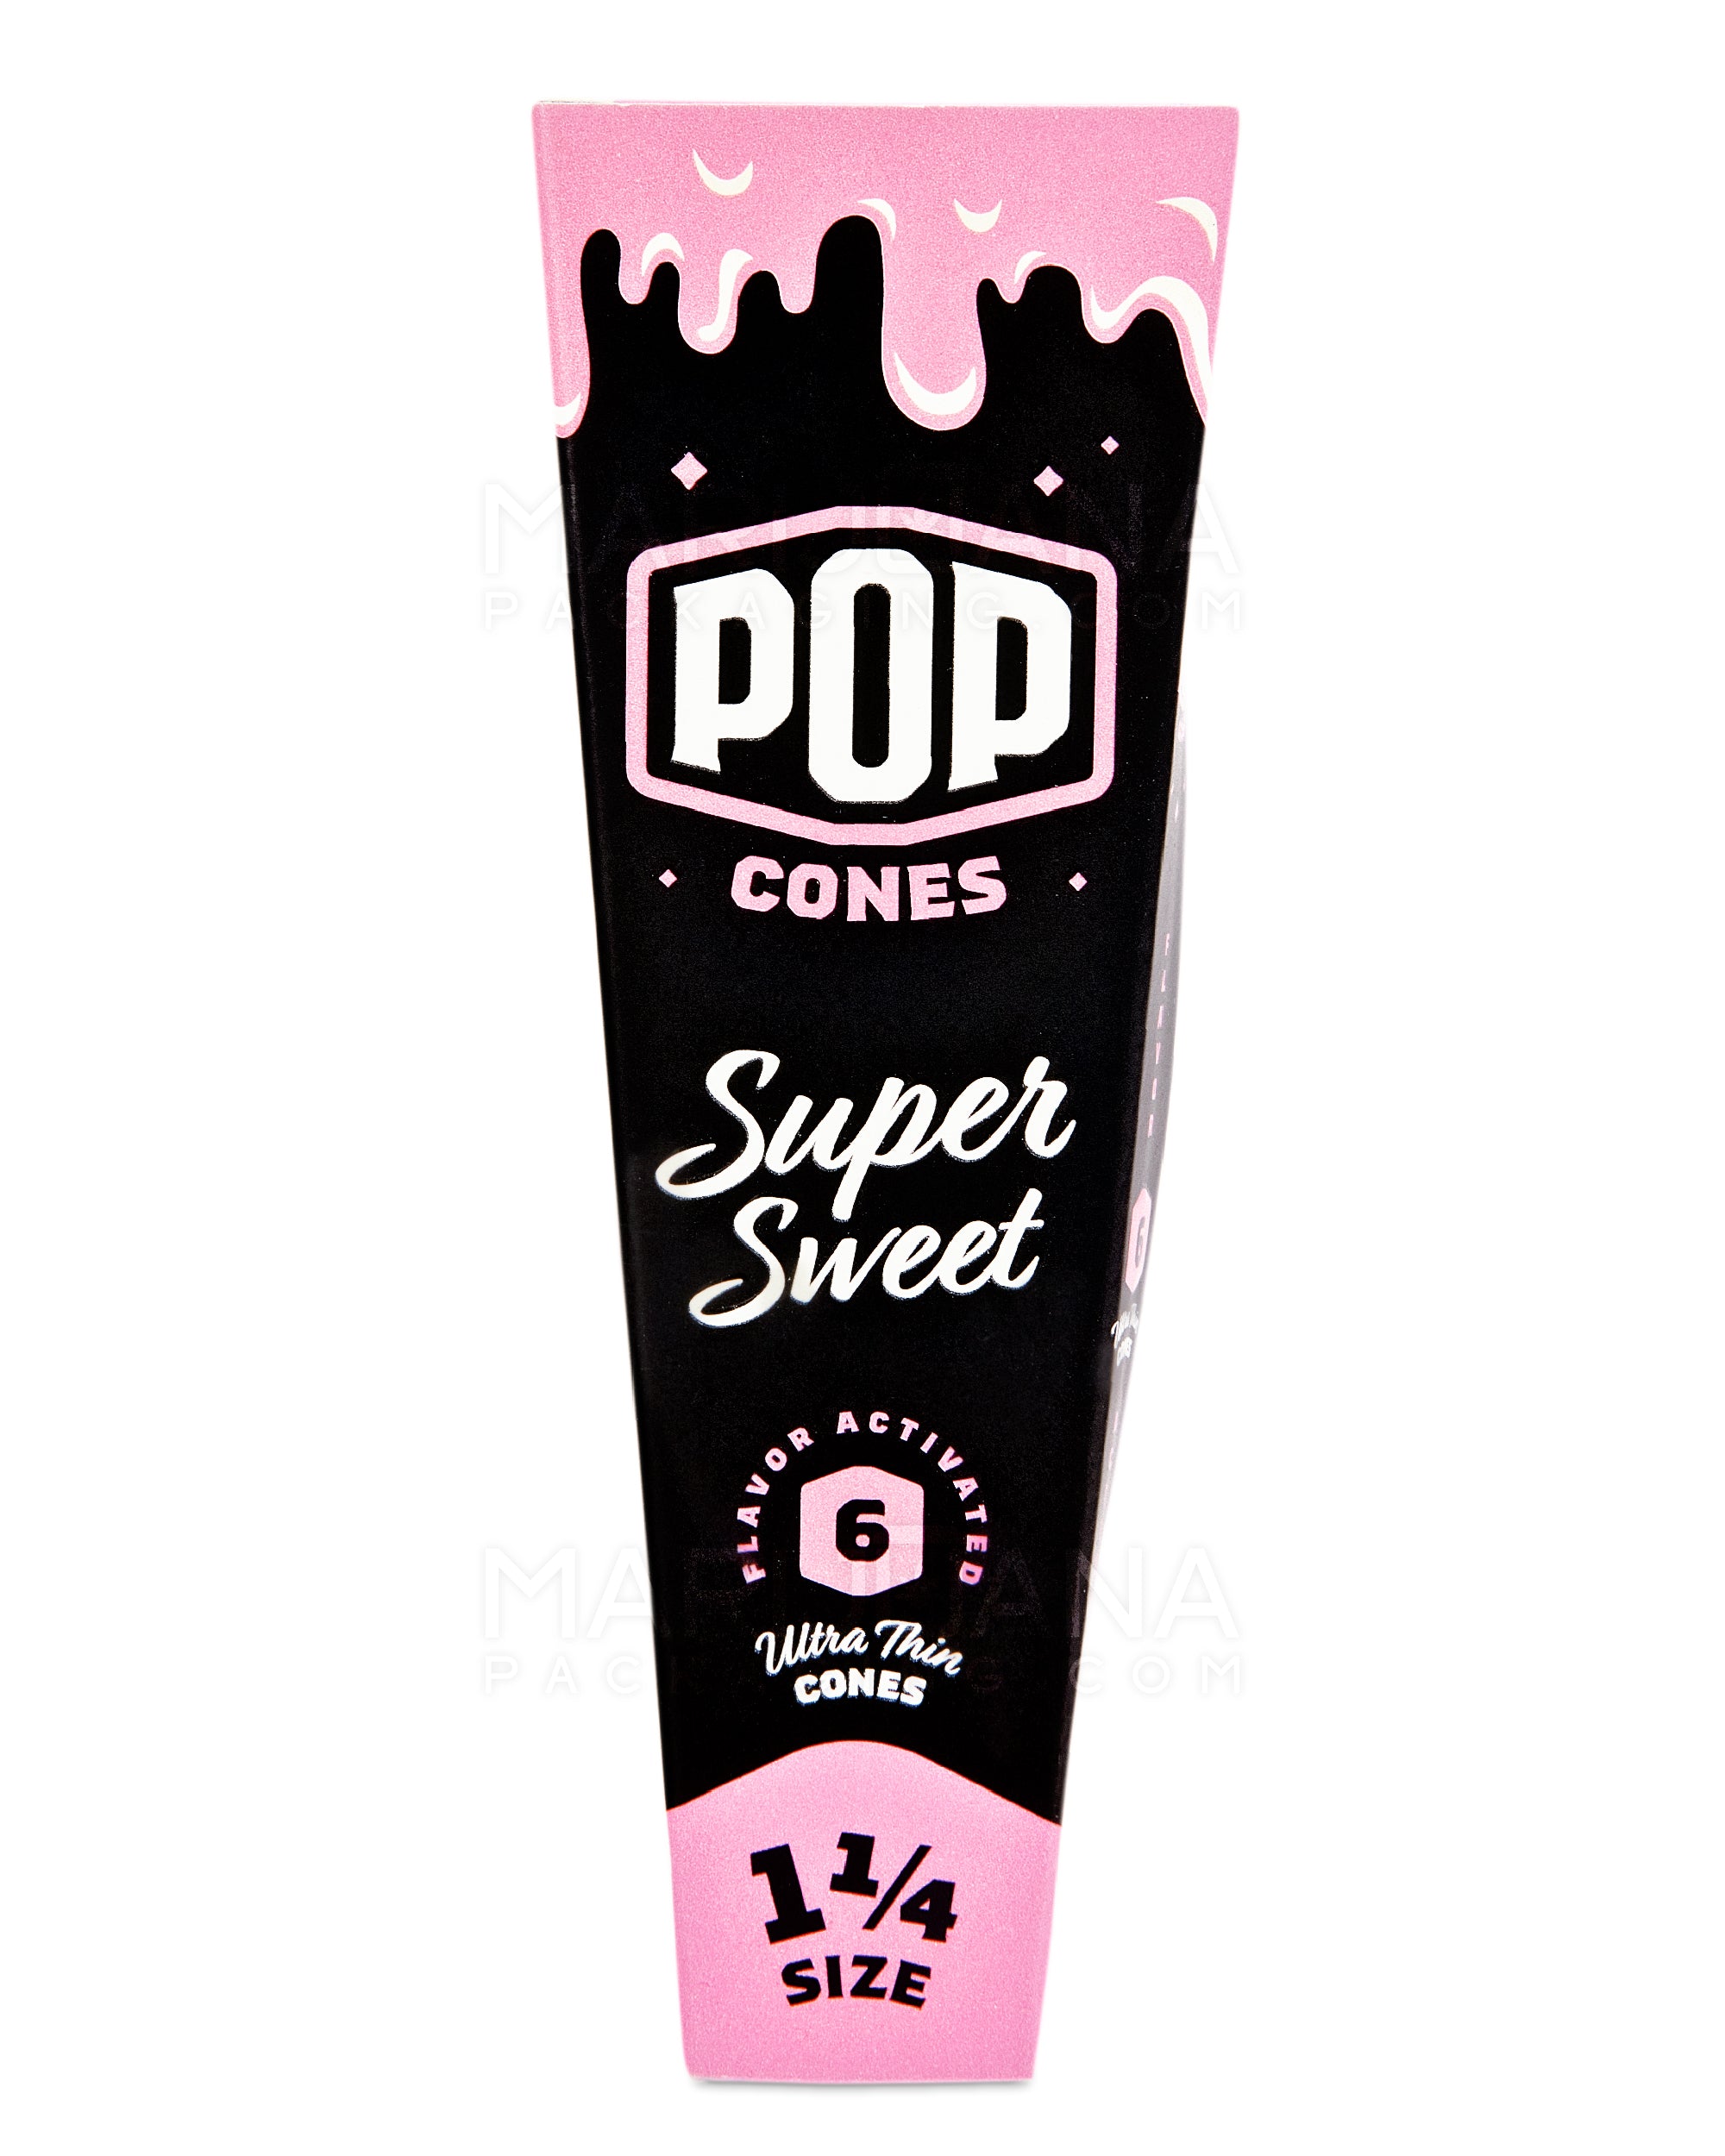 POP CONES | 'Retail Display' 1 1/4 Size Pre-Rolled Cones | 84mm - Super Sweet - 24 Count - 2